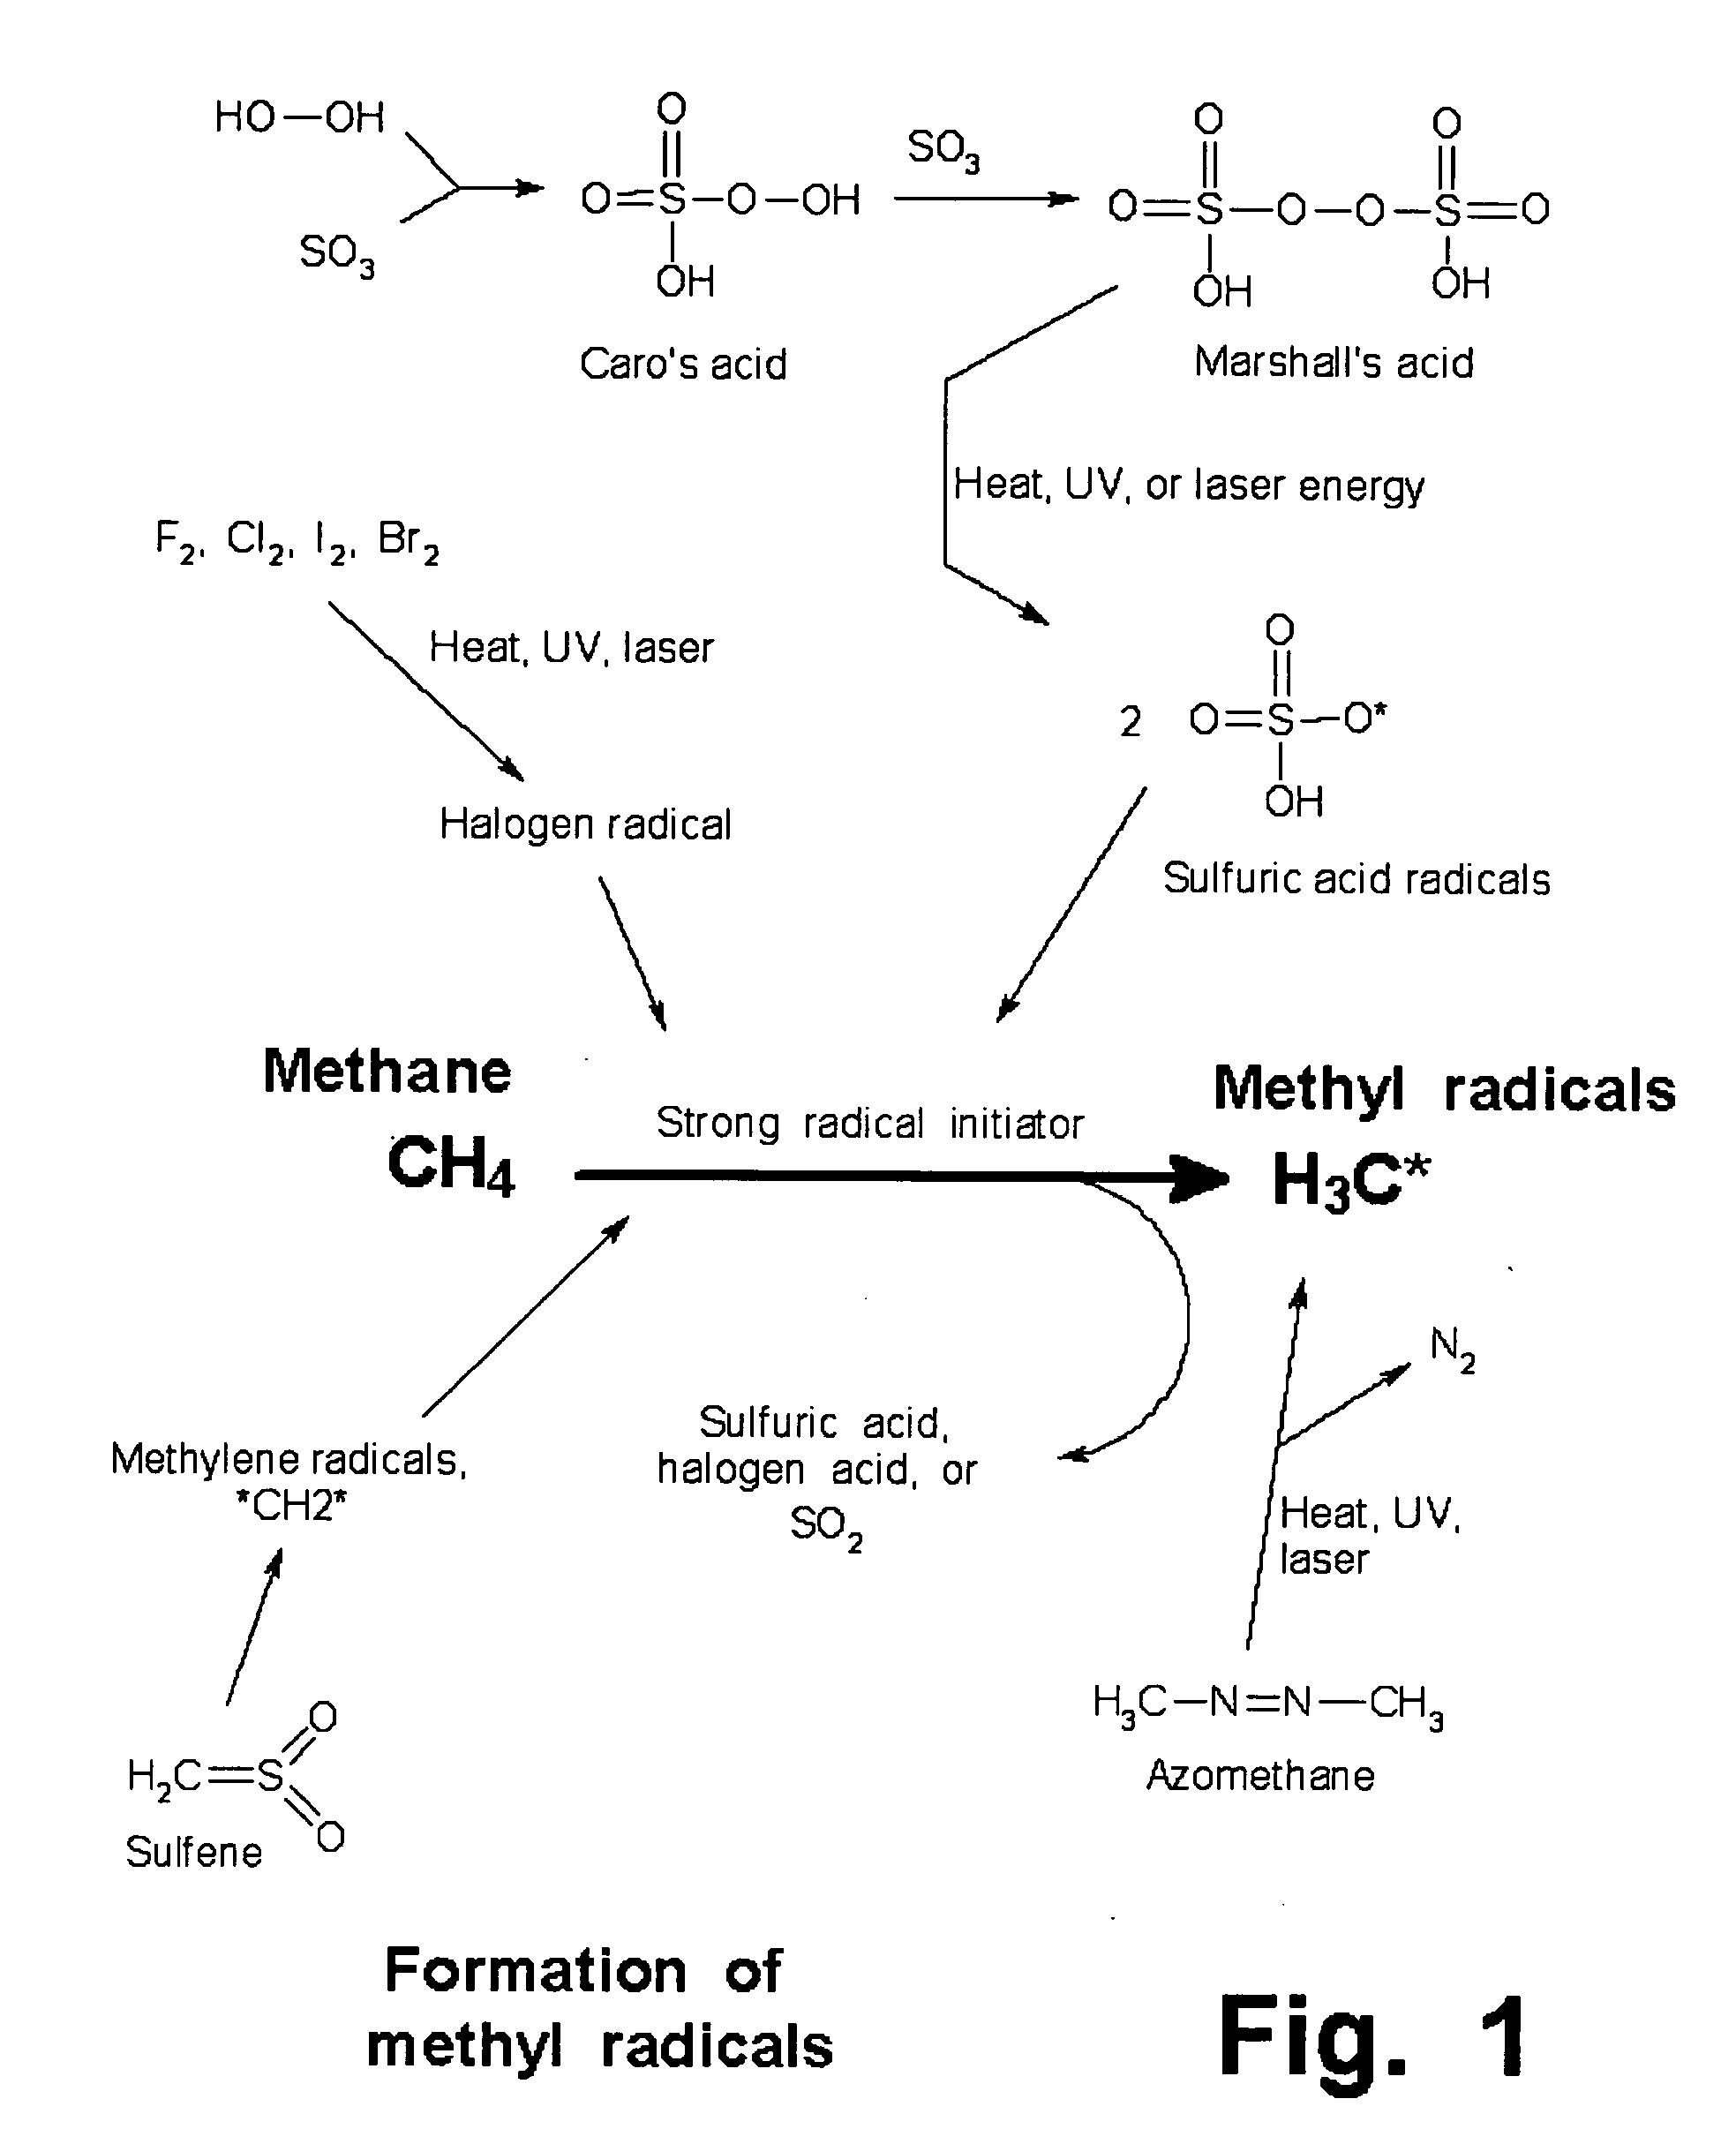 Manufacture of higher hydrocarbons from methane, via methanesulfonic acid, sulfene, and other pathways